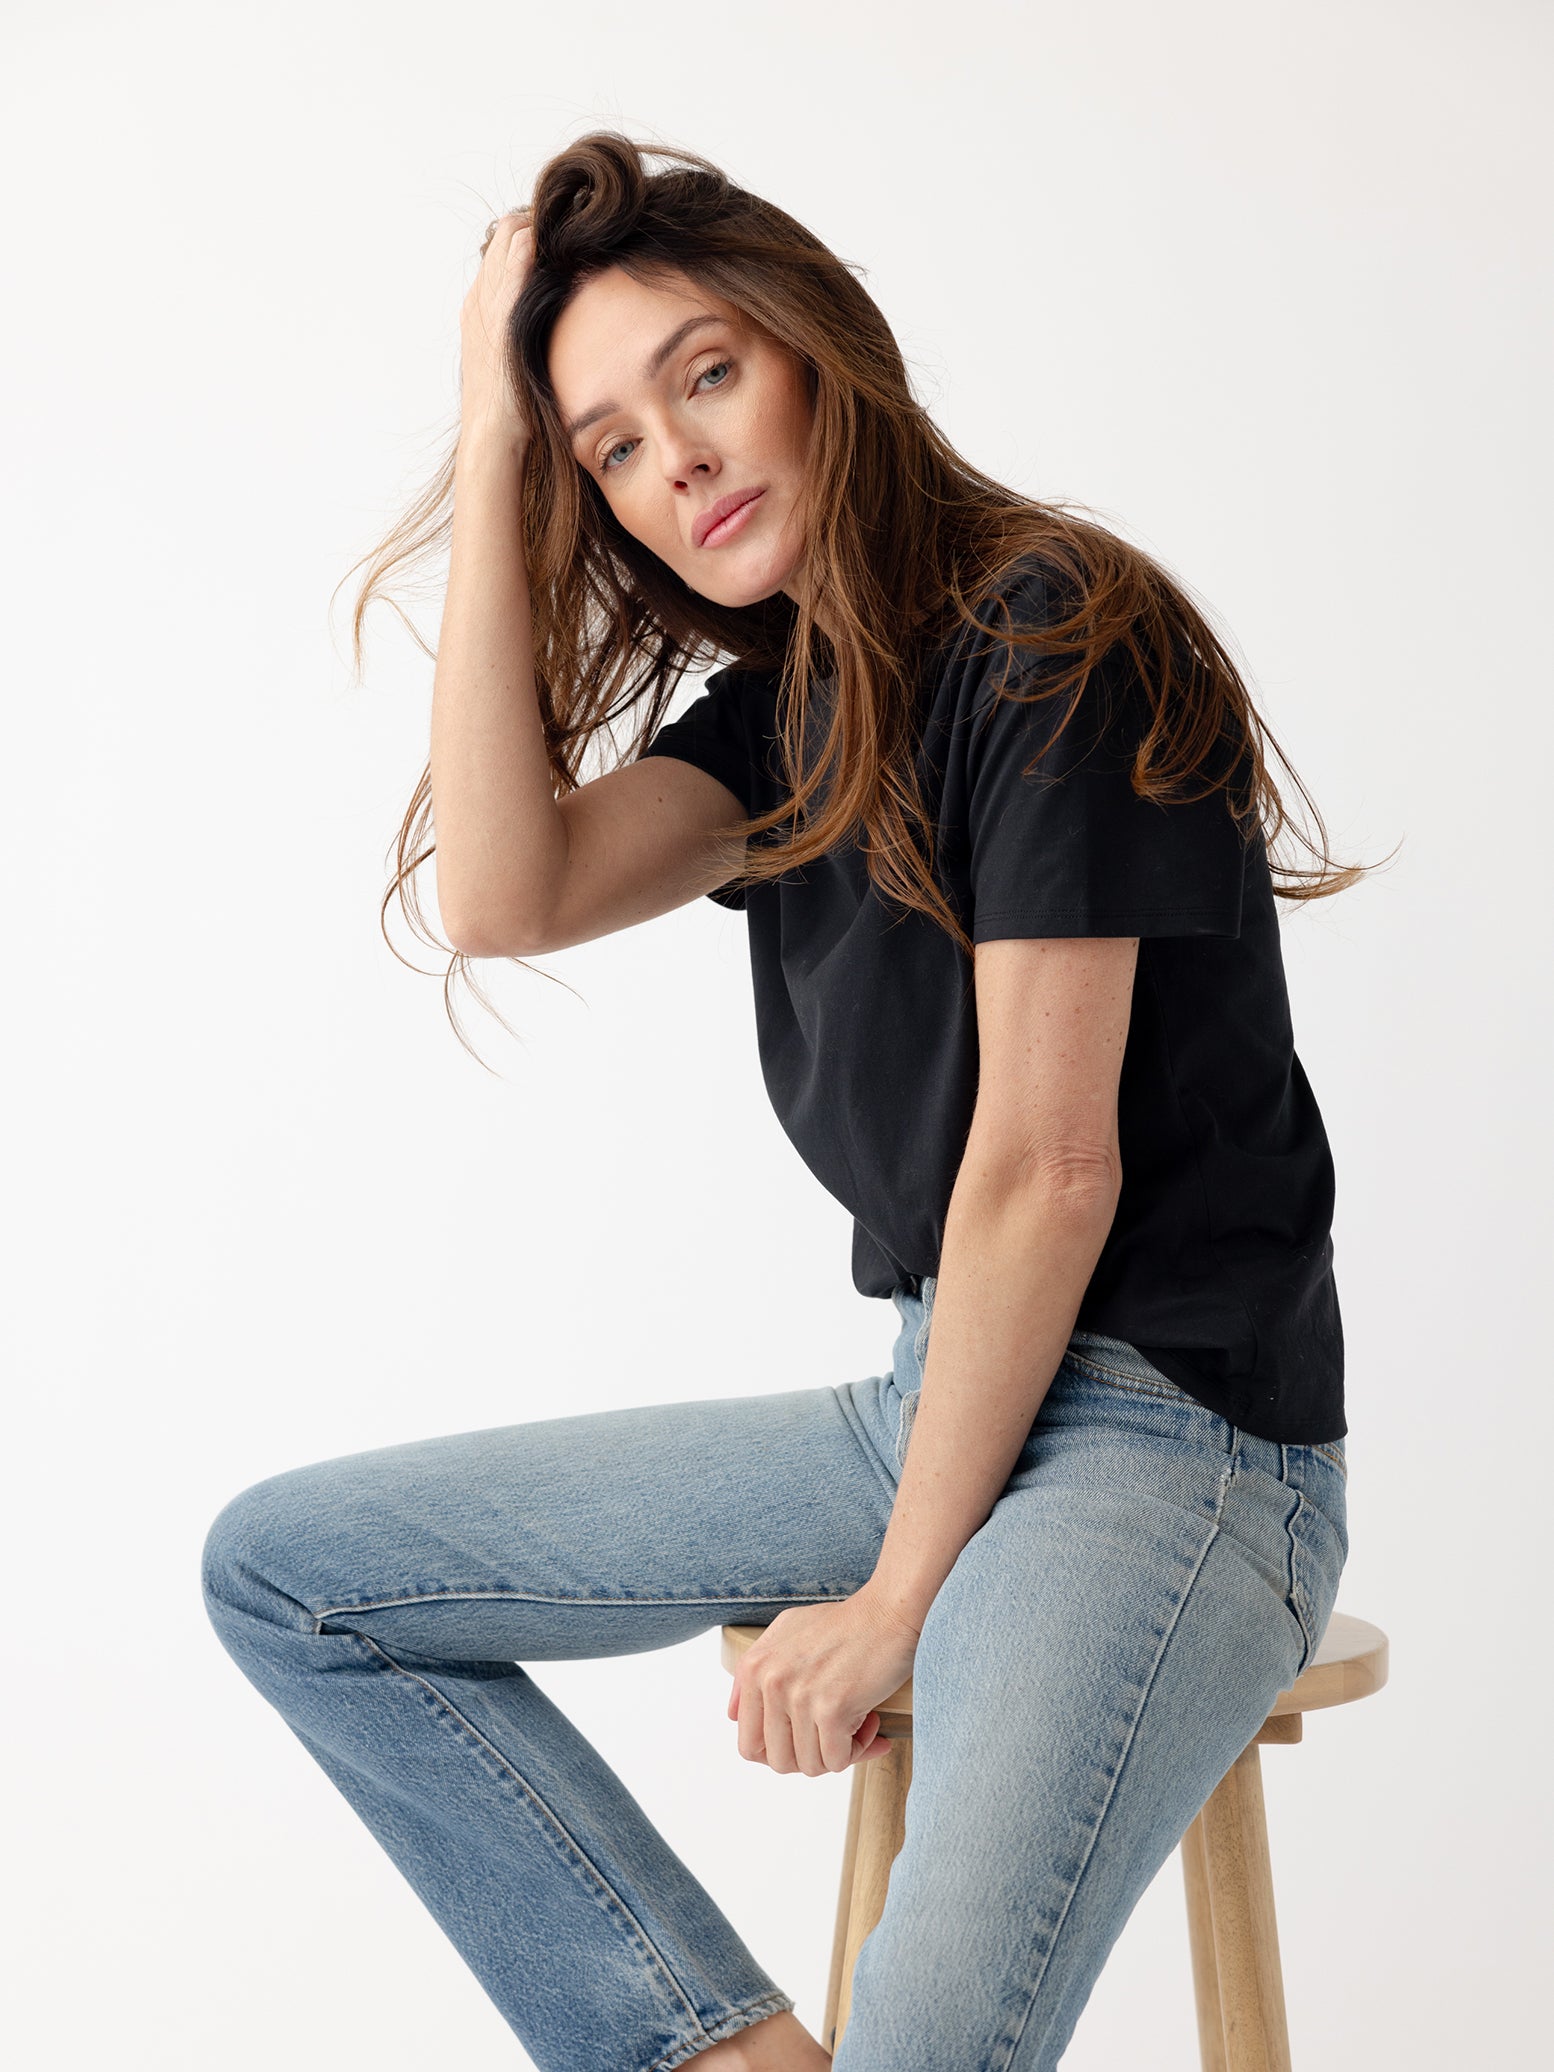 Woman sitting on stool wearing black tee and jeans 